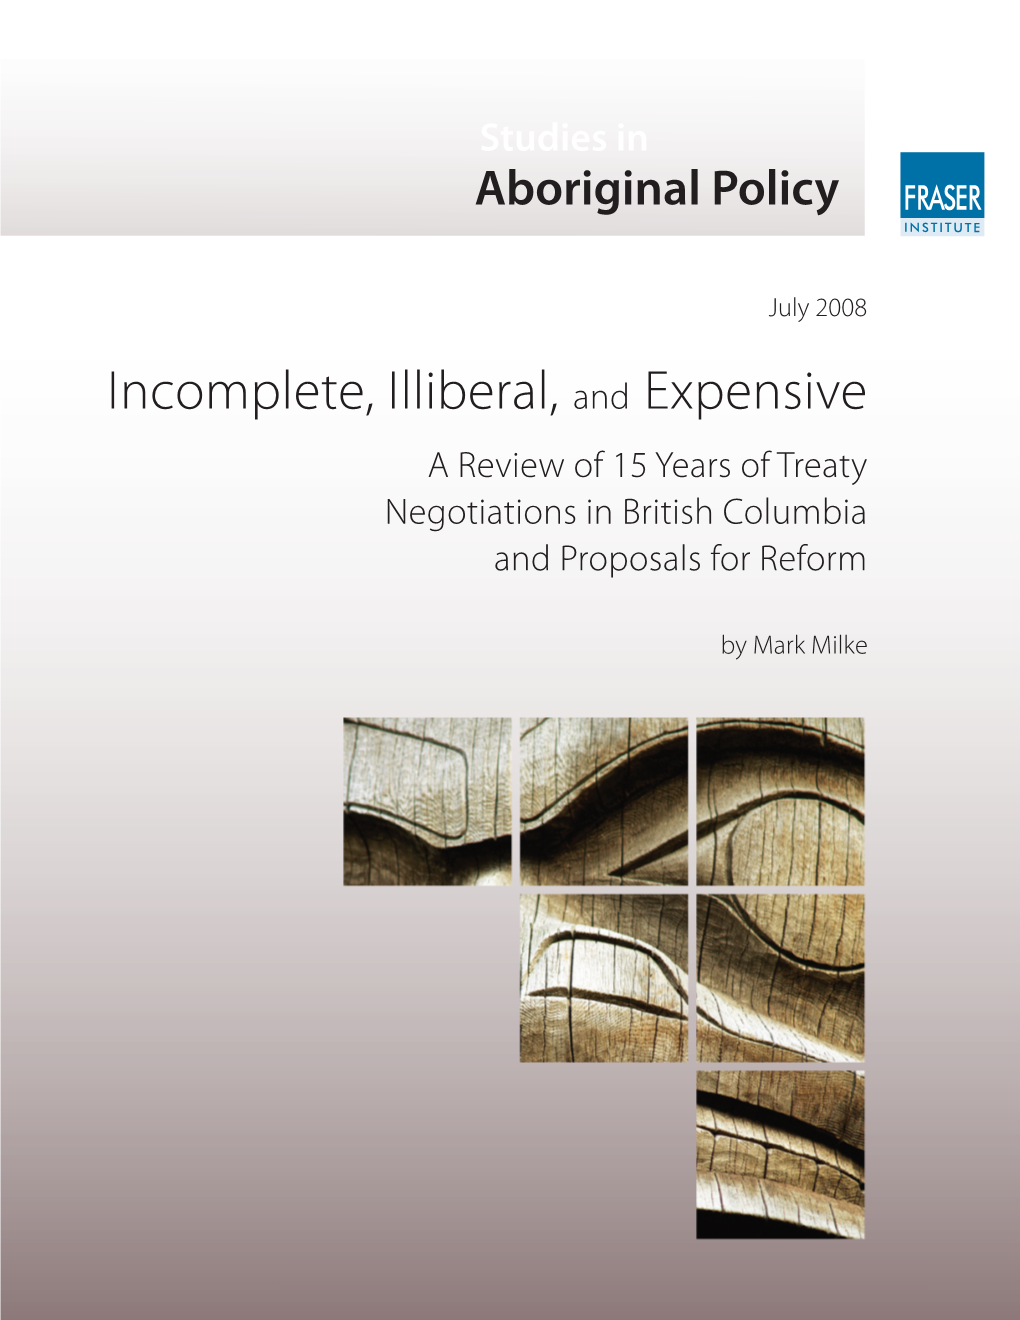 A Review of 15 Years of Treaty Negotiations in British Columbia and Proposals for Reform